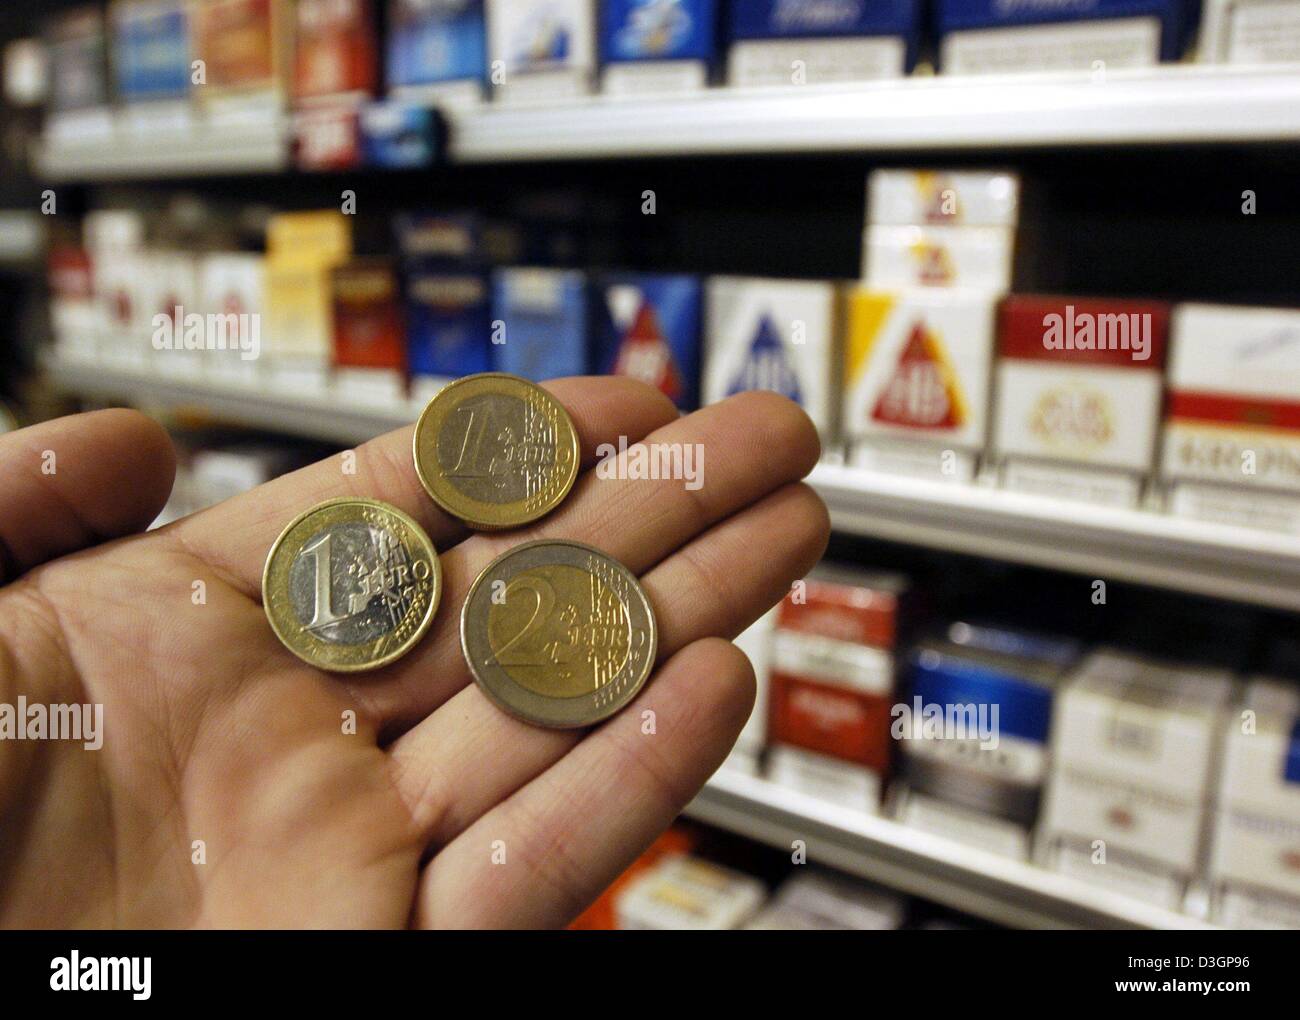 (dpa) - A hand holds up euro coins in front of a shelf of cigarette packs in a tobacco shop in Regensburg, Germany, 4 March 2004. The price of one pack with 19 cigarettes was raised 40 cents on 1 March 2004 in Germany. One pack now costs between 3.40 to 3.60 euros. The higher price is due to an increase of 1.2 cents of tax on each cigarette. The tax will contribute to the budget of Stock Photo